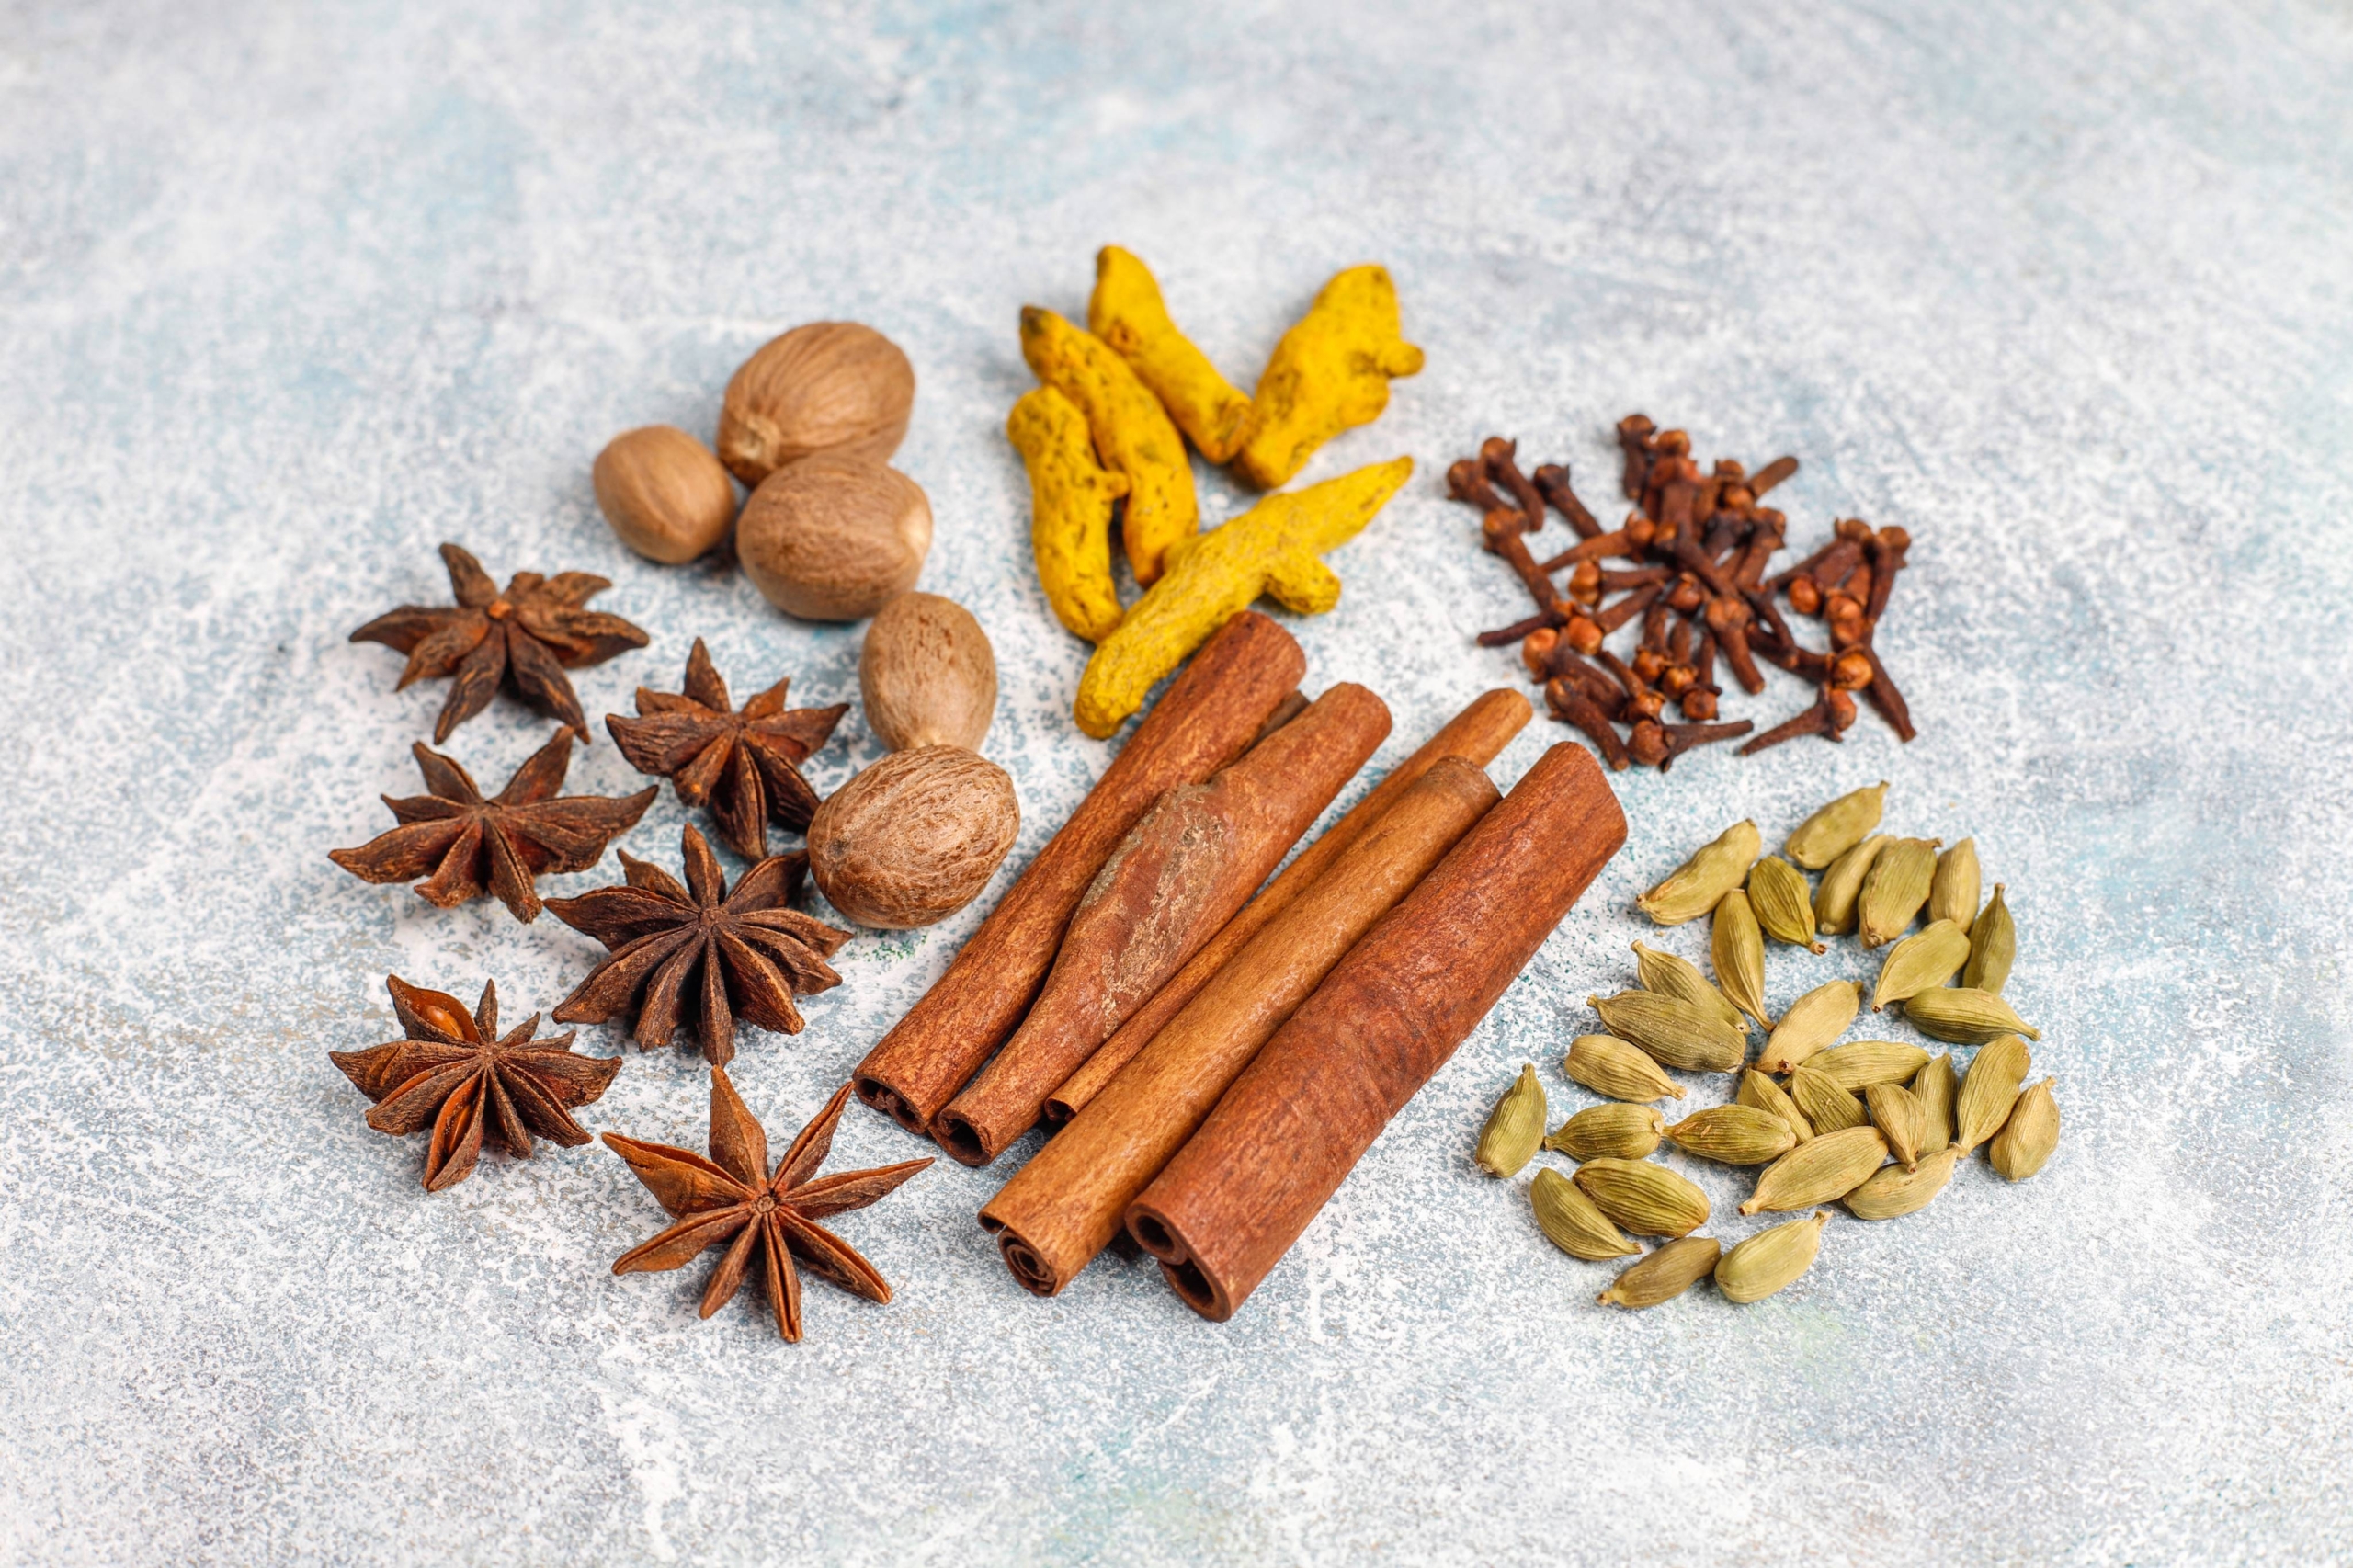 Essential spices for Indian cooking